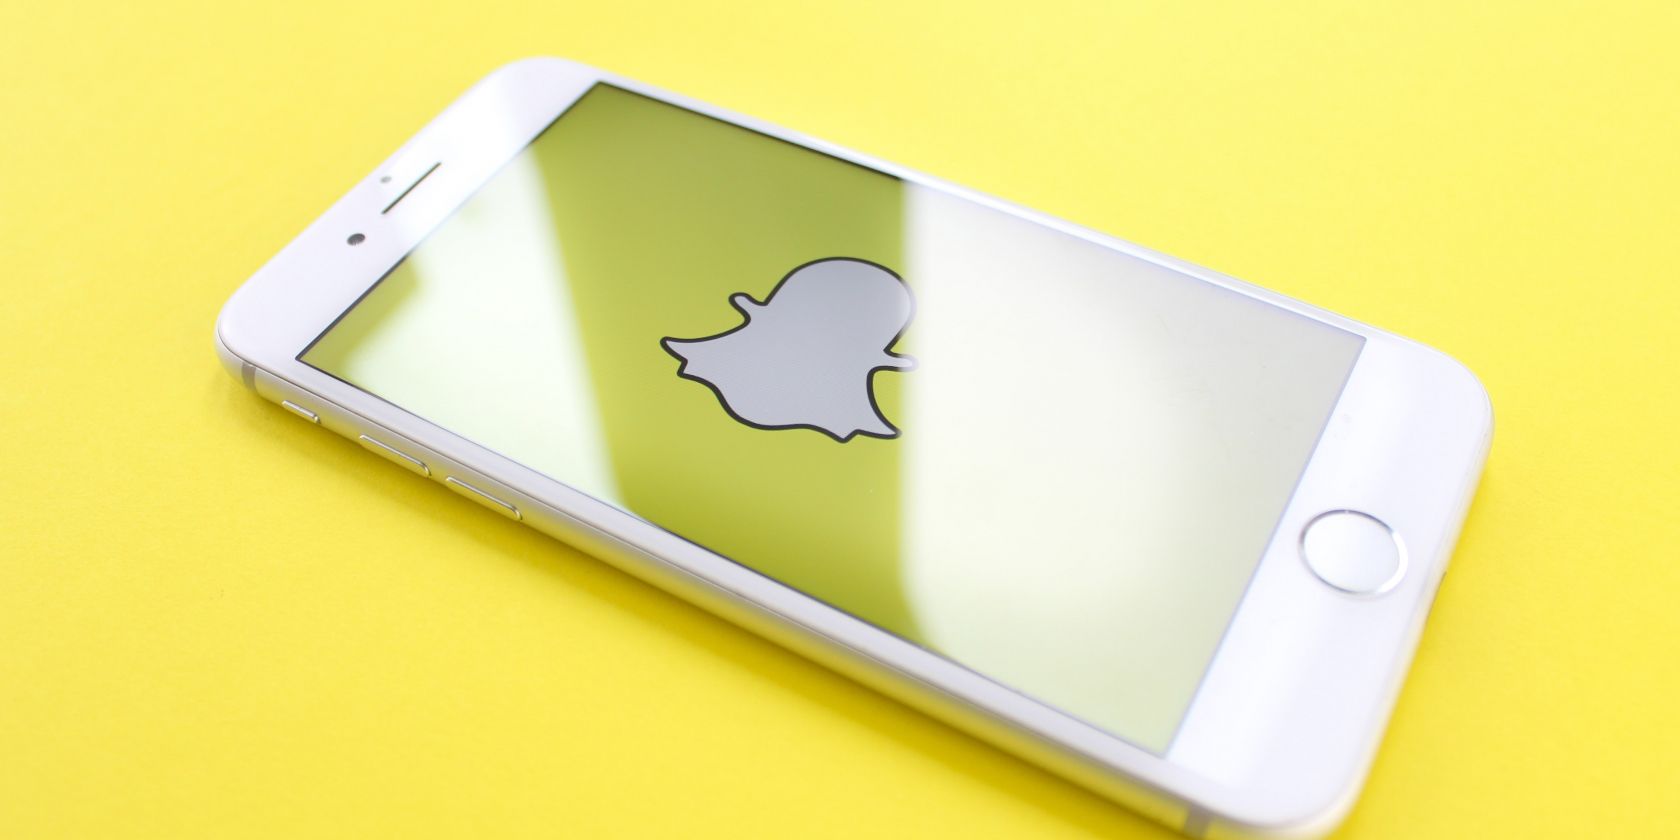 Anyone may hack your Snapchat account; here’s how to prevent it.